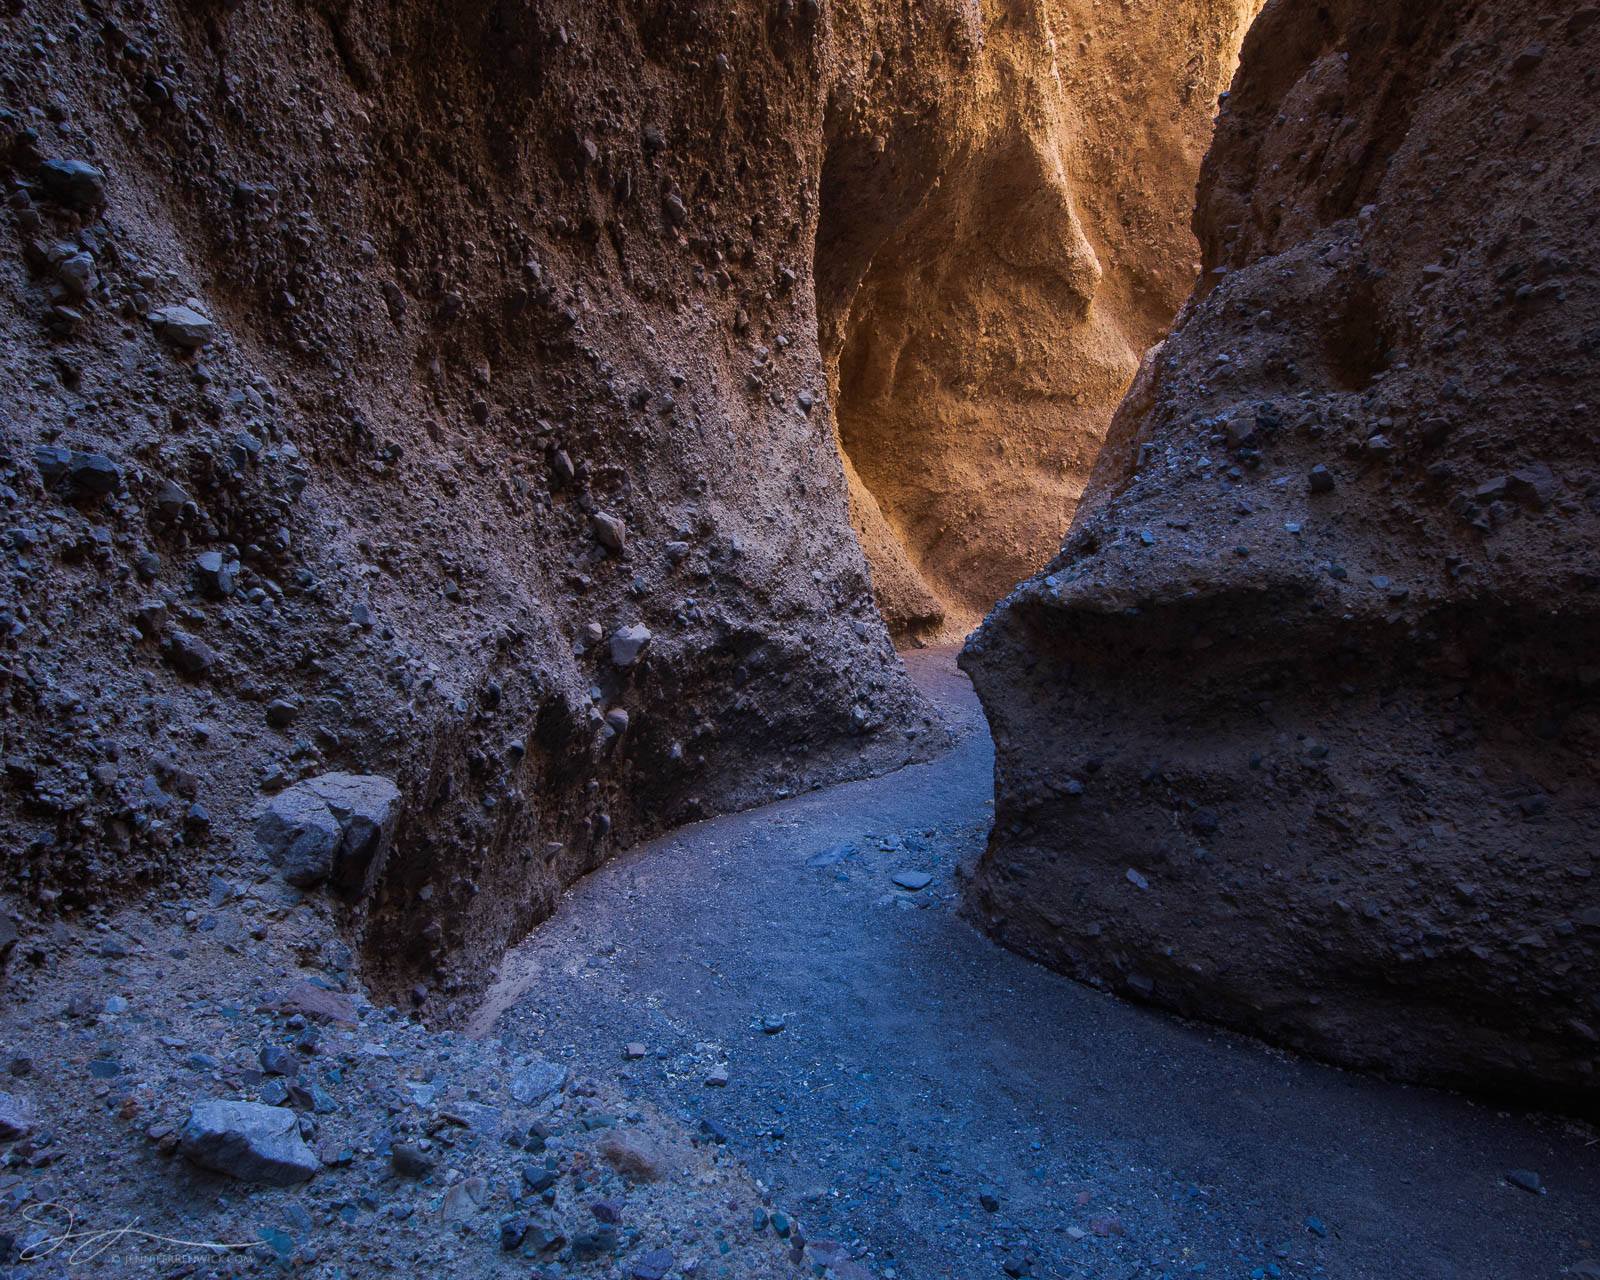 Cool shadows and warm reflected light lead the way through a remote slot canyon in Death Valley National Park.